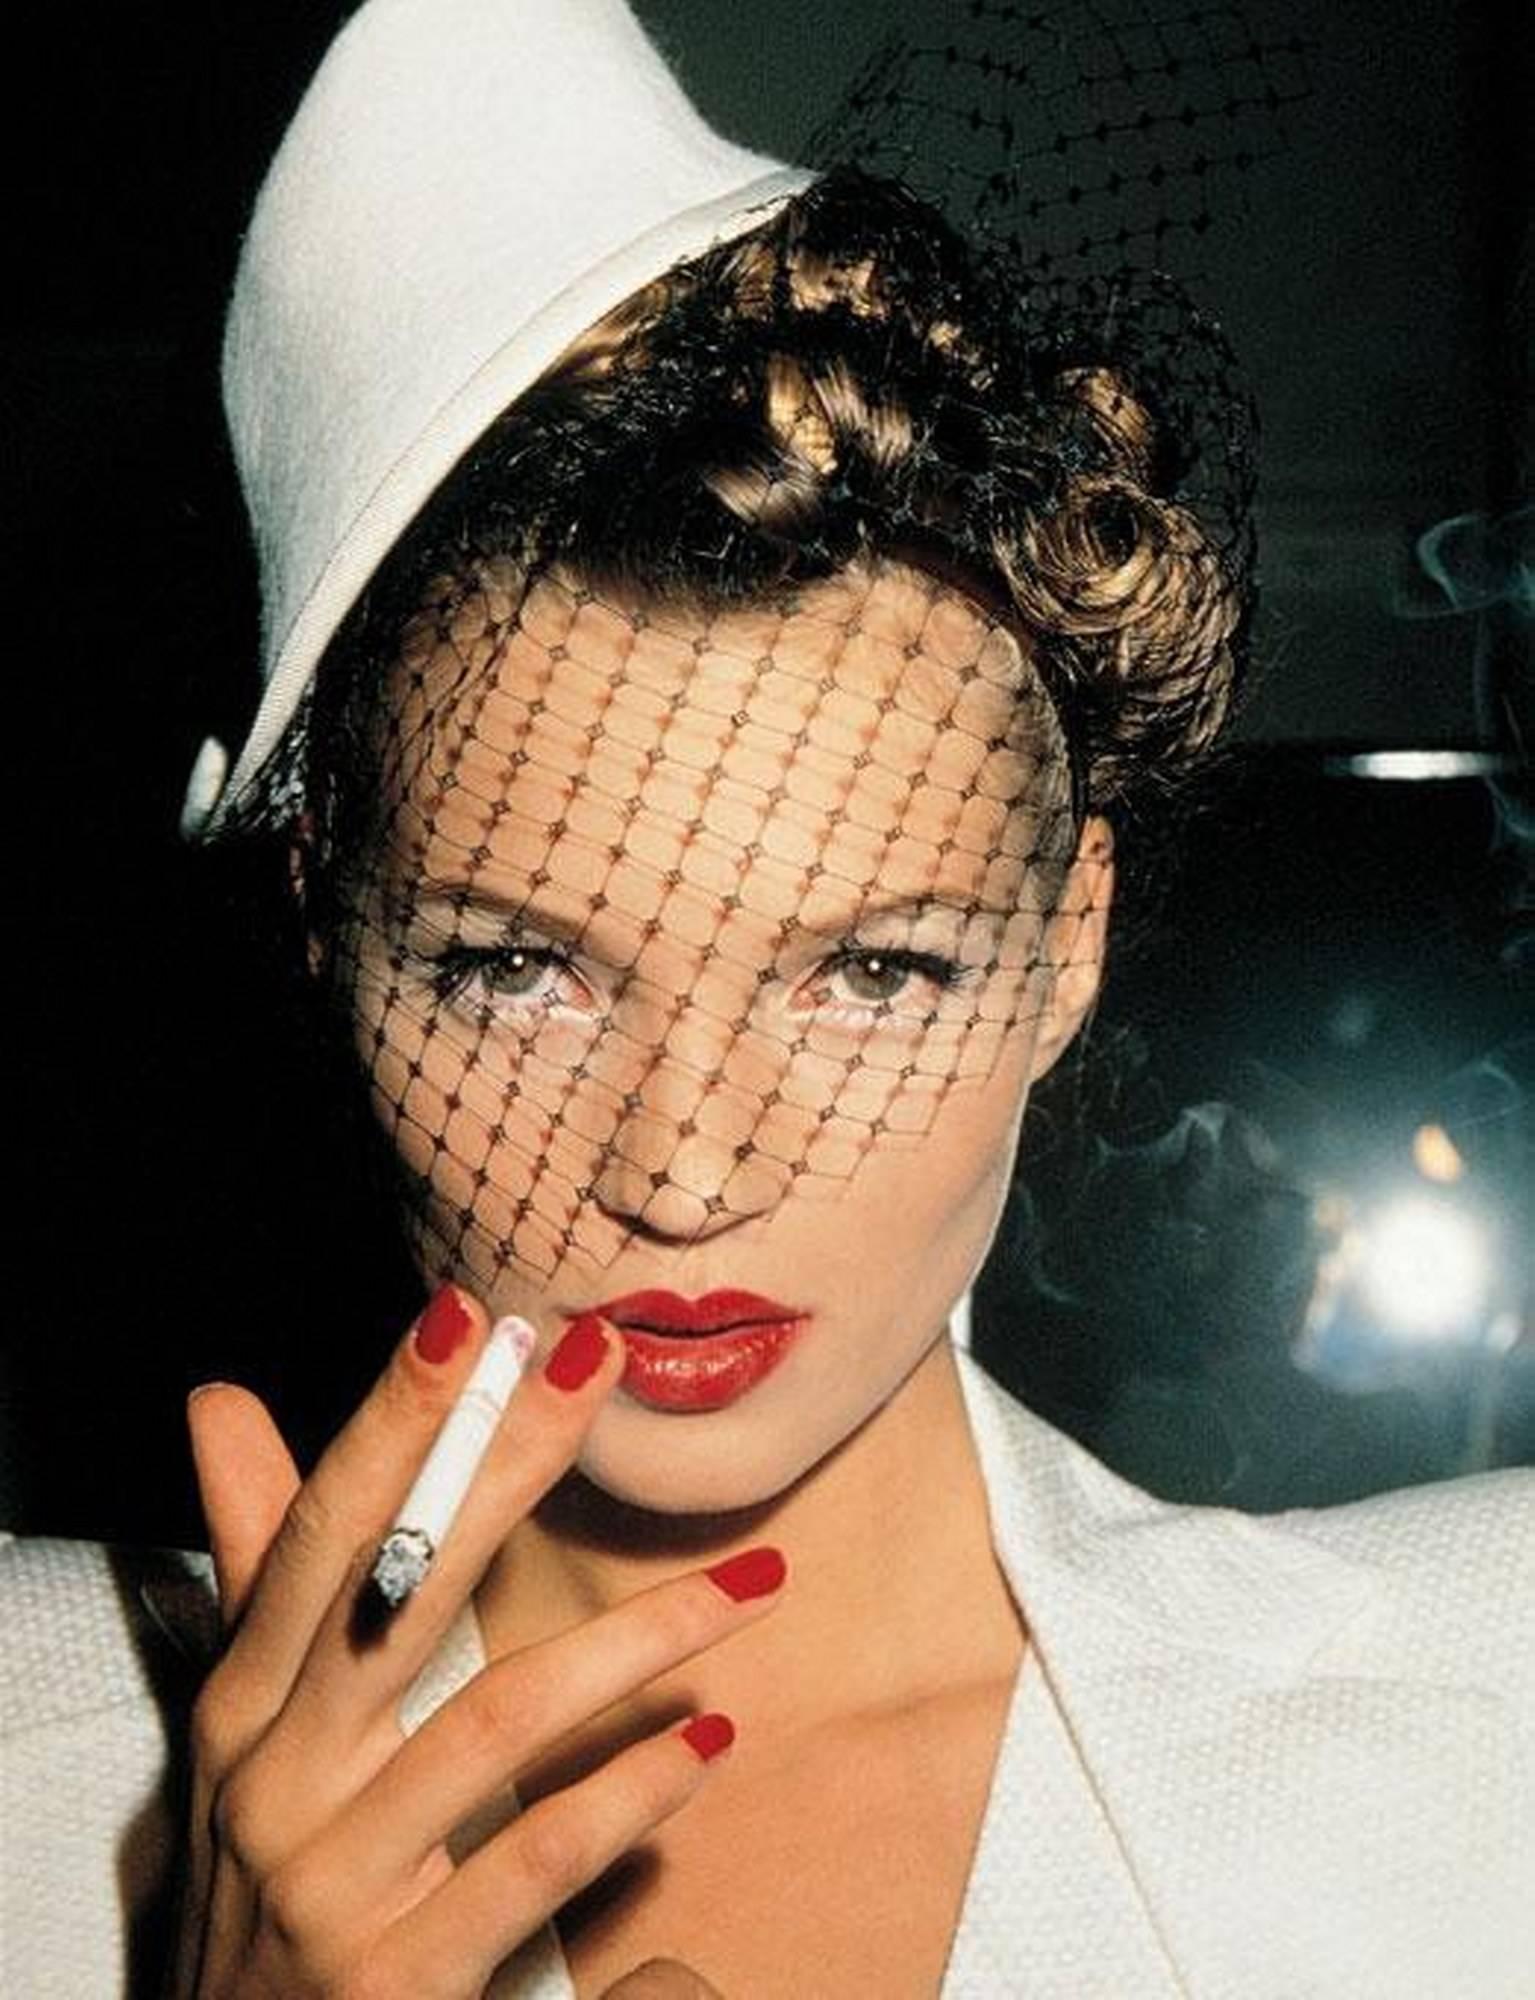 Kate Moss with Fag - portrait of the supermodel and fashion icon - Photograph by Roxanne Lowit